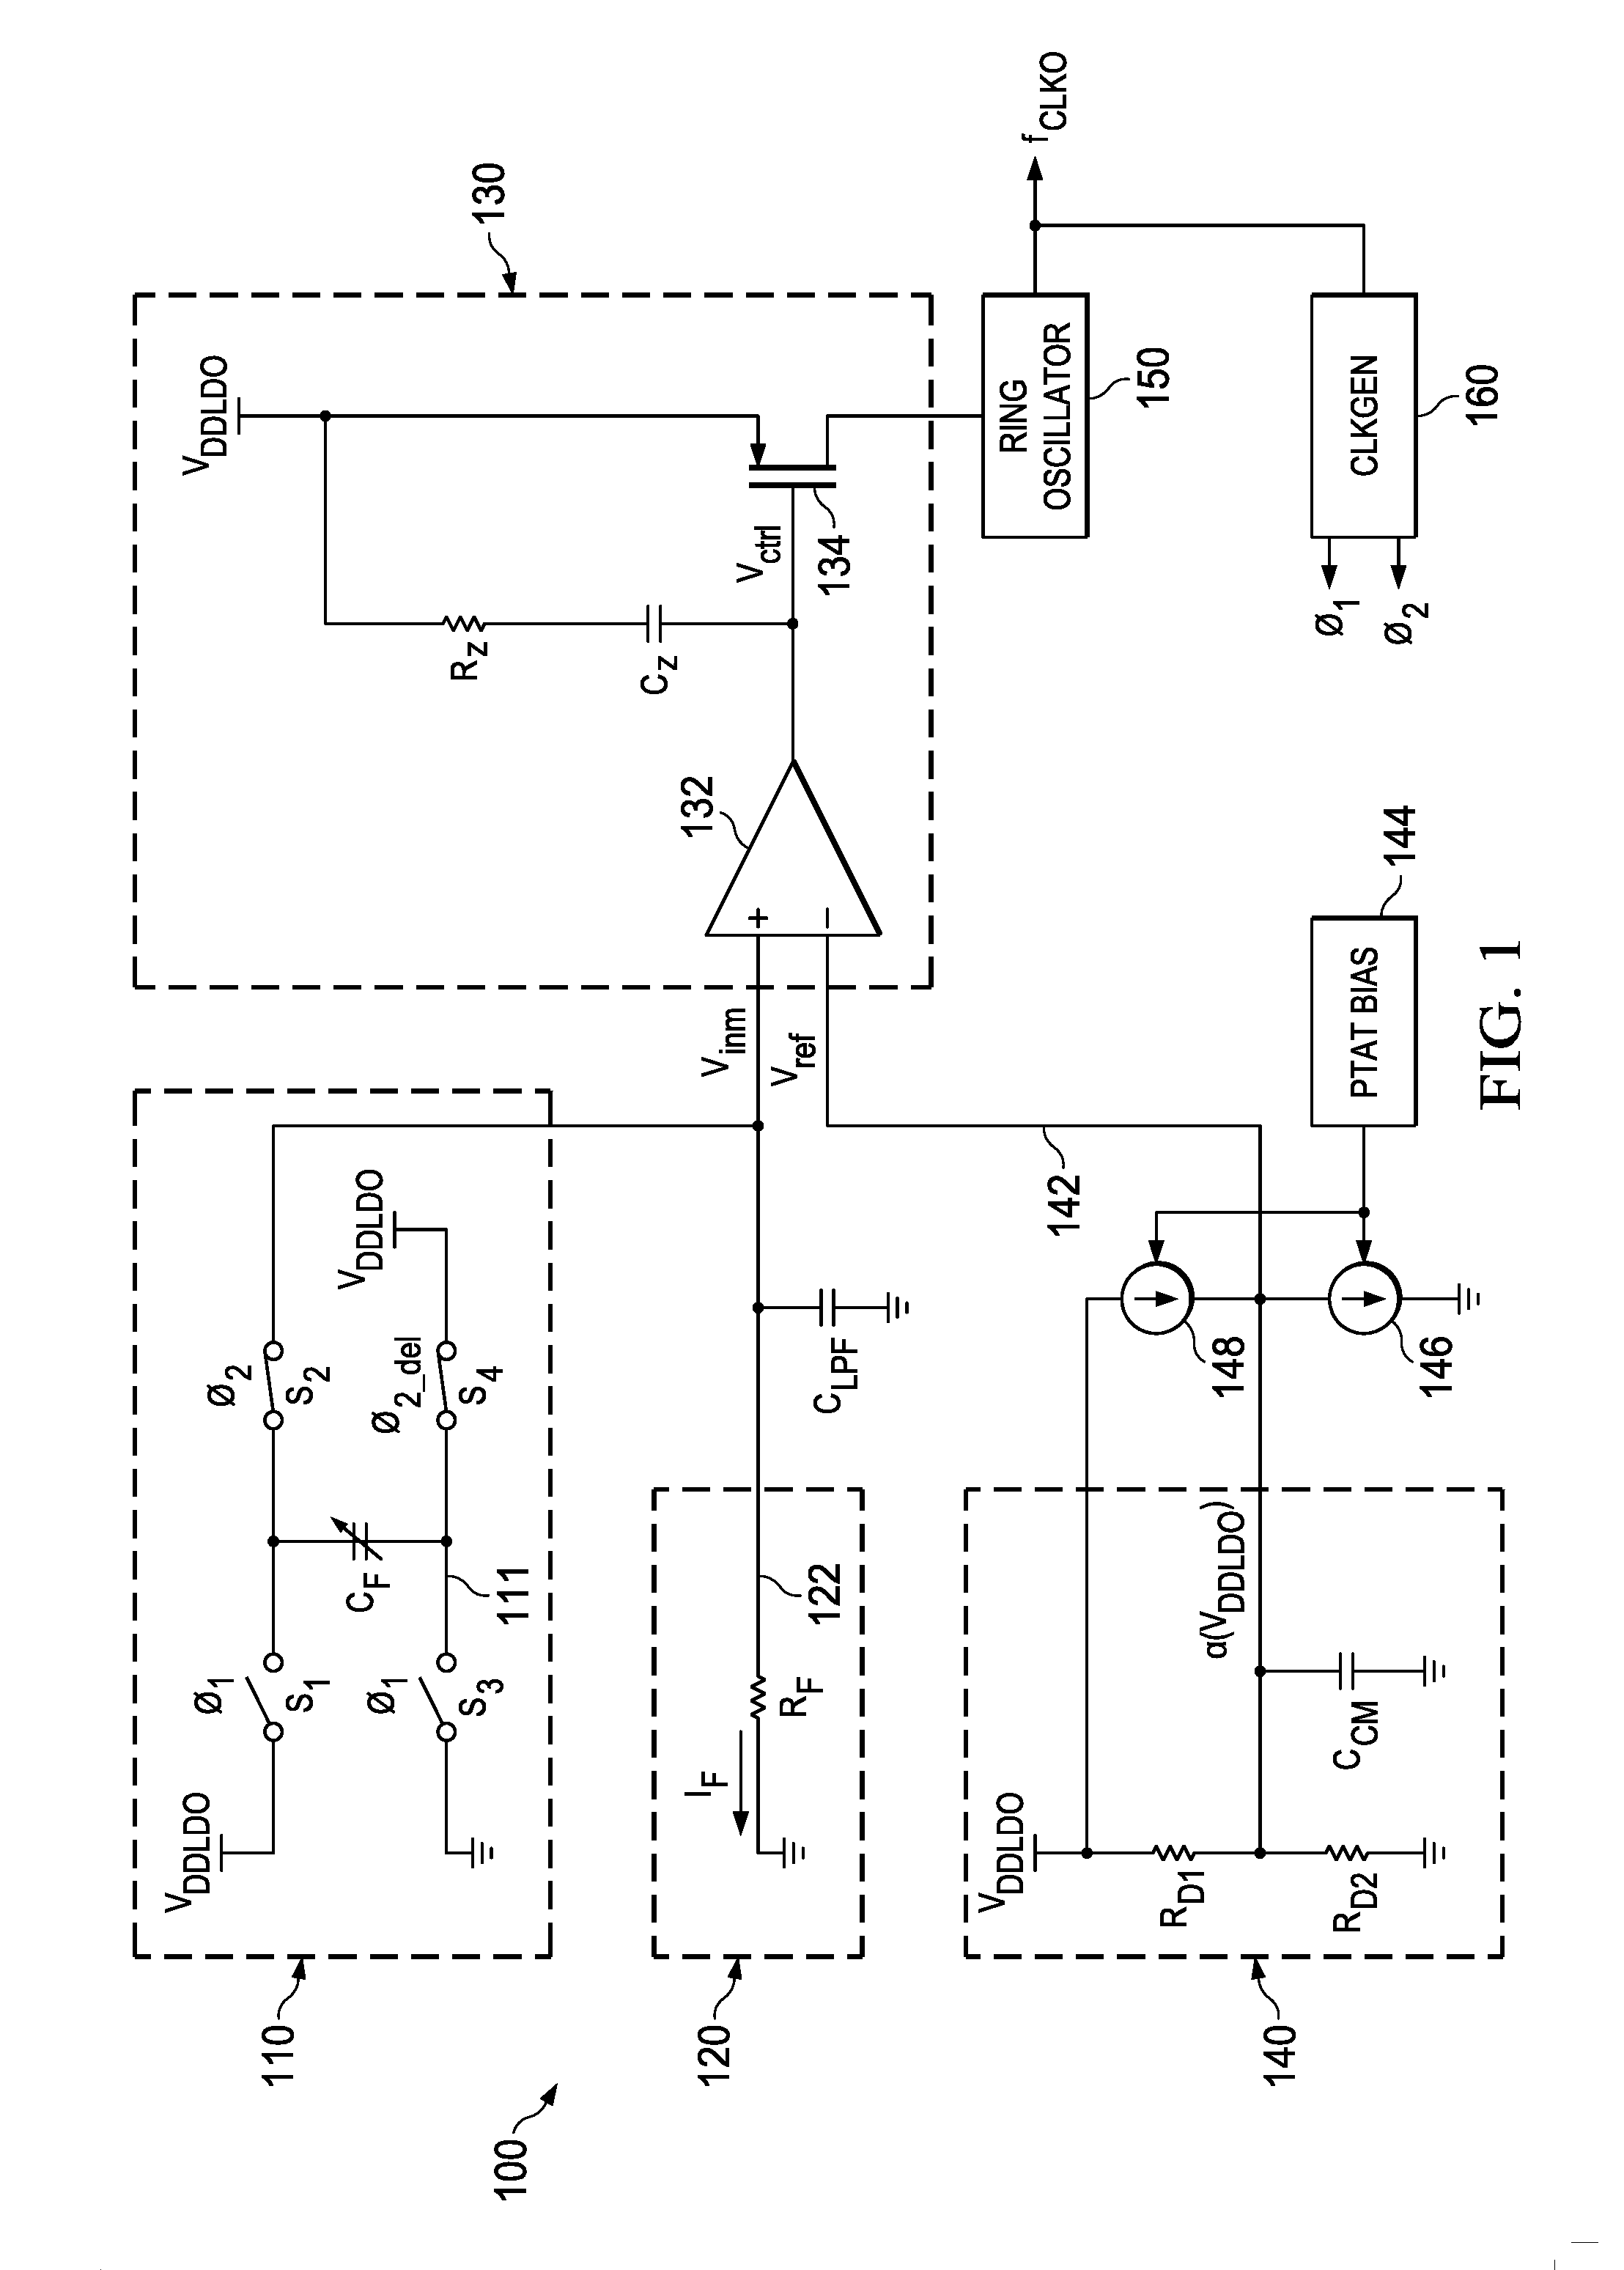 Stability controlled high frequency chopper-based oscillator